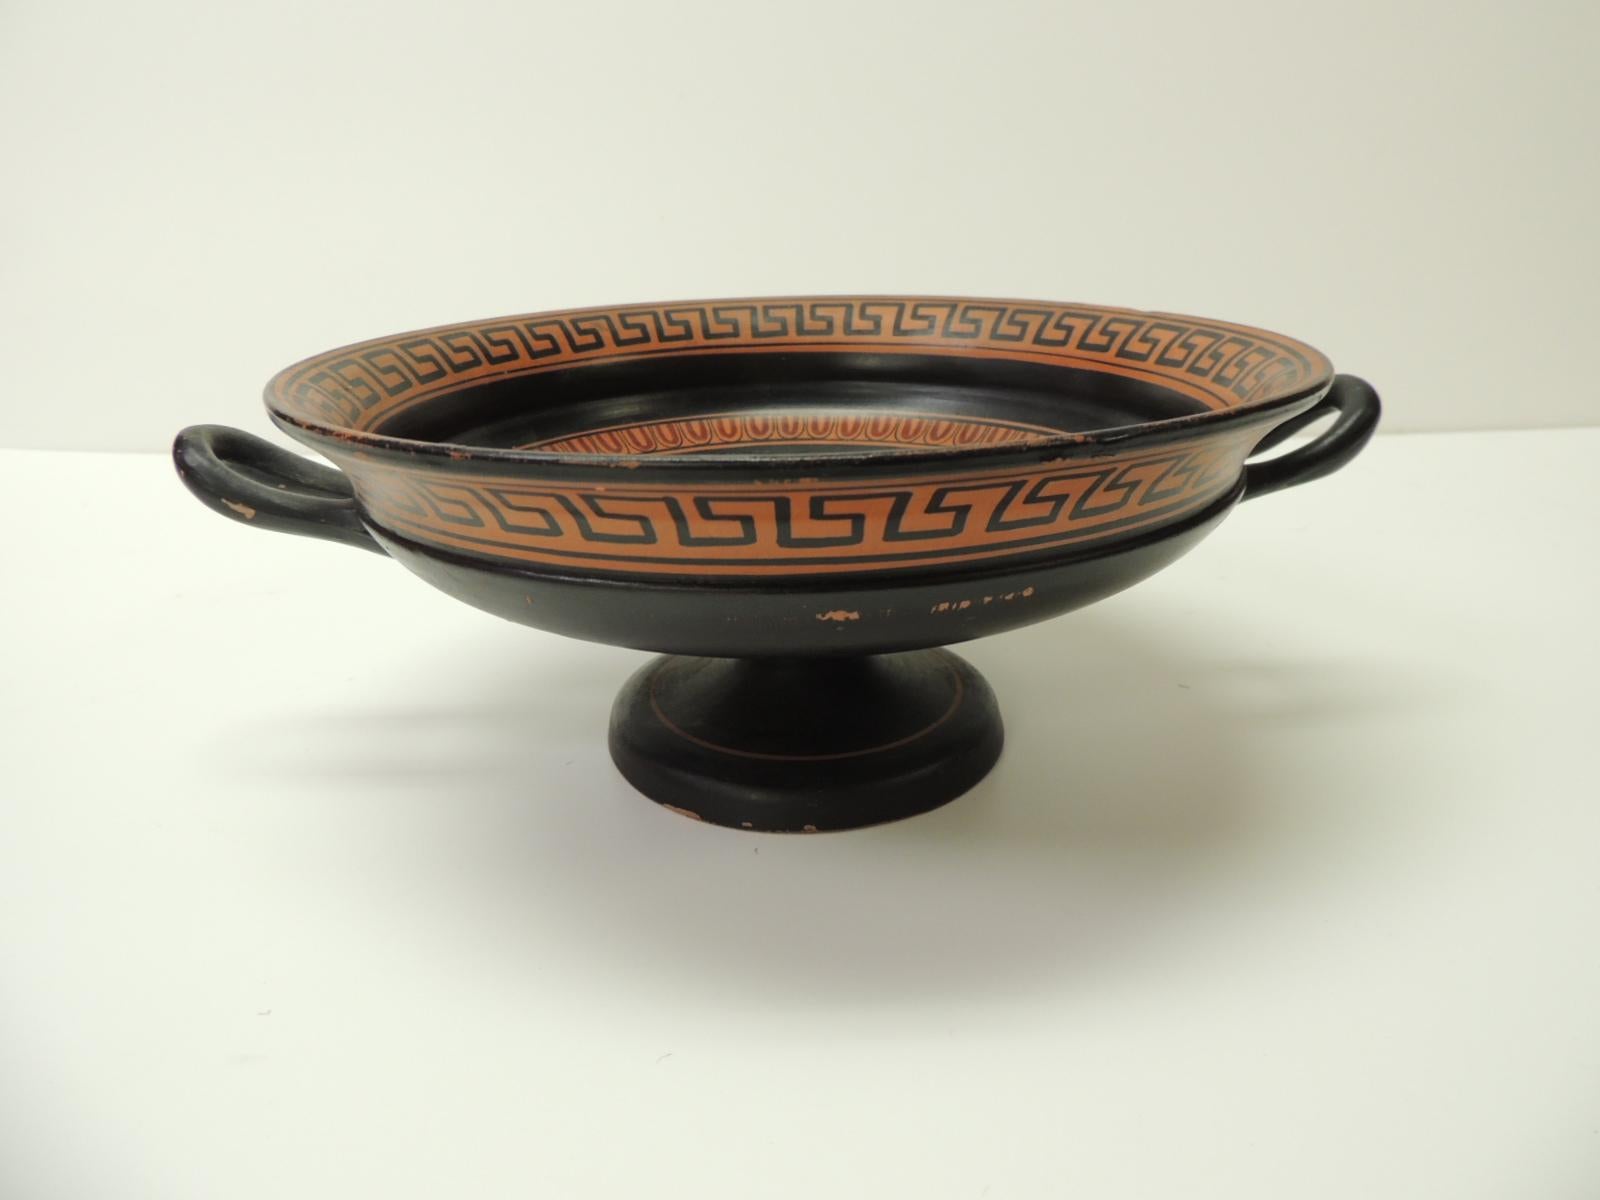 Vintage encaustic hand painted Greek Terracotta centerpiece with Handles. Round decorative hand painted deep dish.
Orange and black dish depicting a naked Greek God seating on a huge jar. In shades of red, orange and black.
Signed: J.